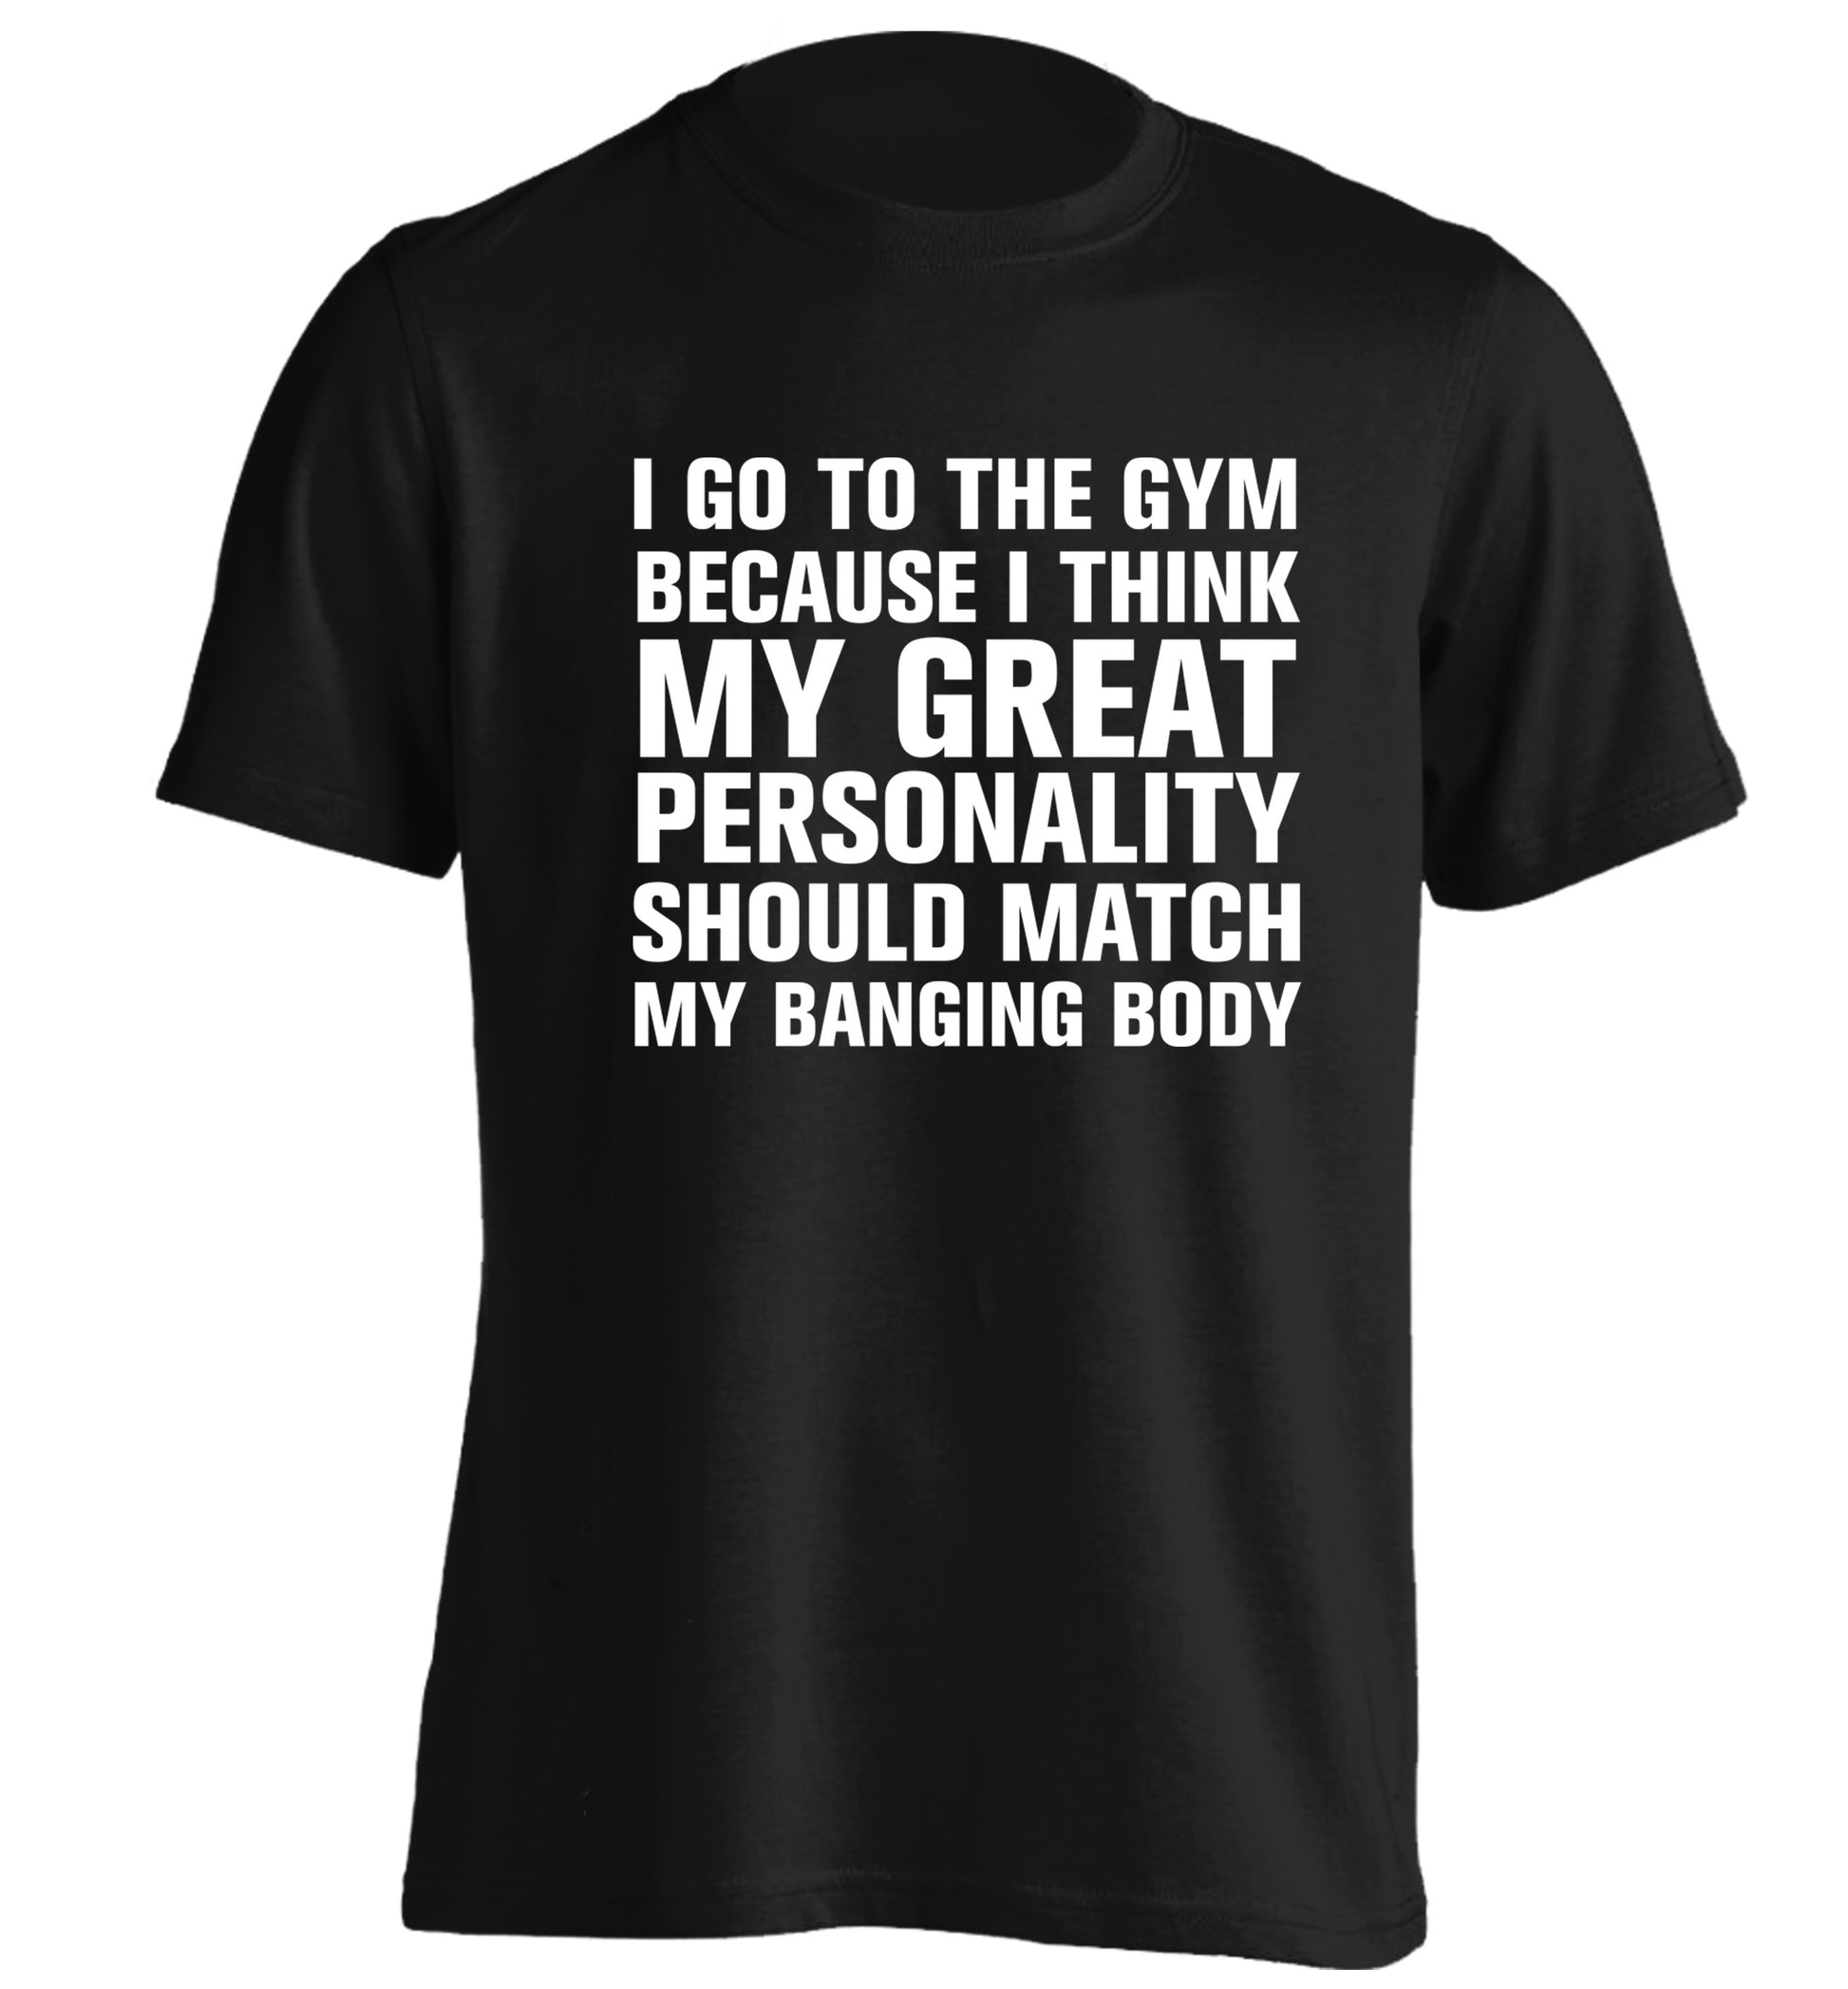 I go to the gym because I think my great personality should match my banging body adults unisex black Tshirt 2XL